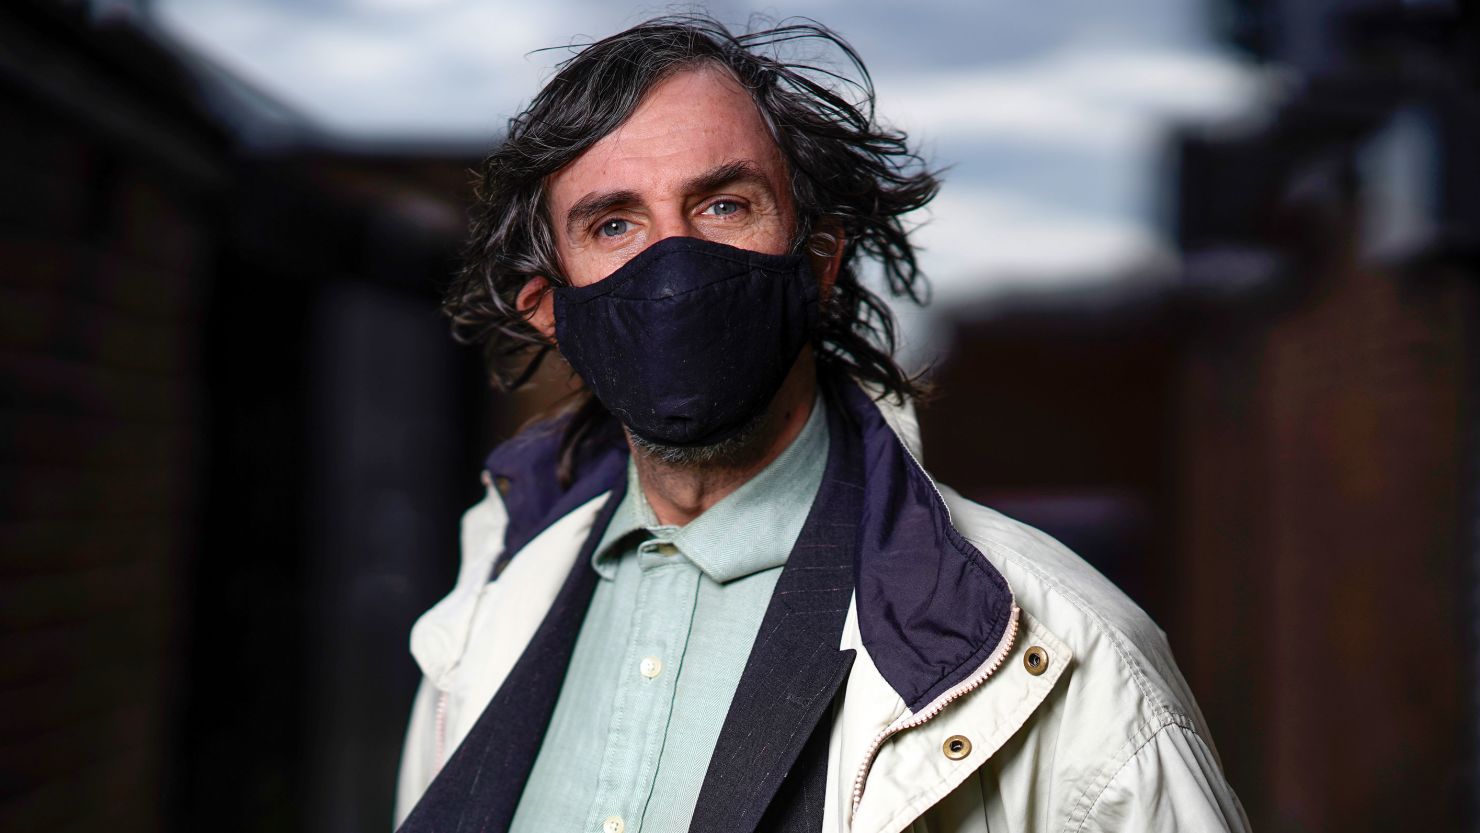 Robert Sollery wears his face mask on May 13 in Darlaston, West Midlands, United Kingdom.